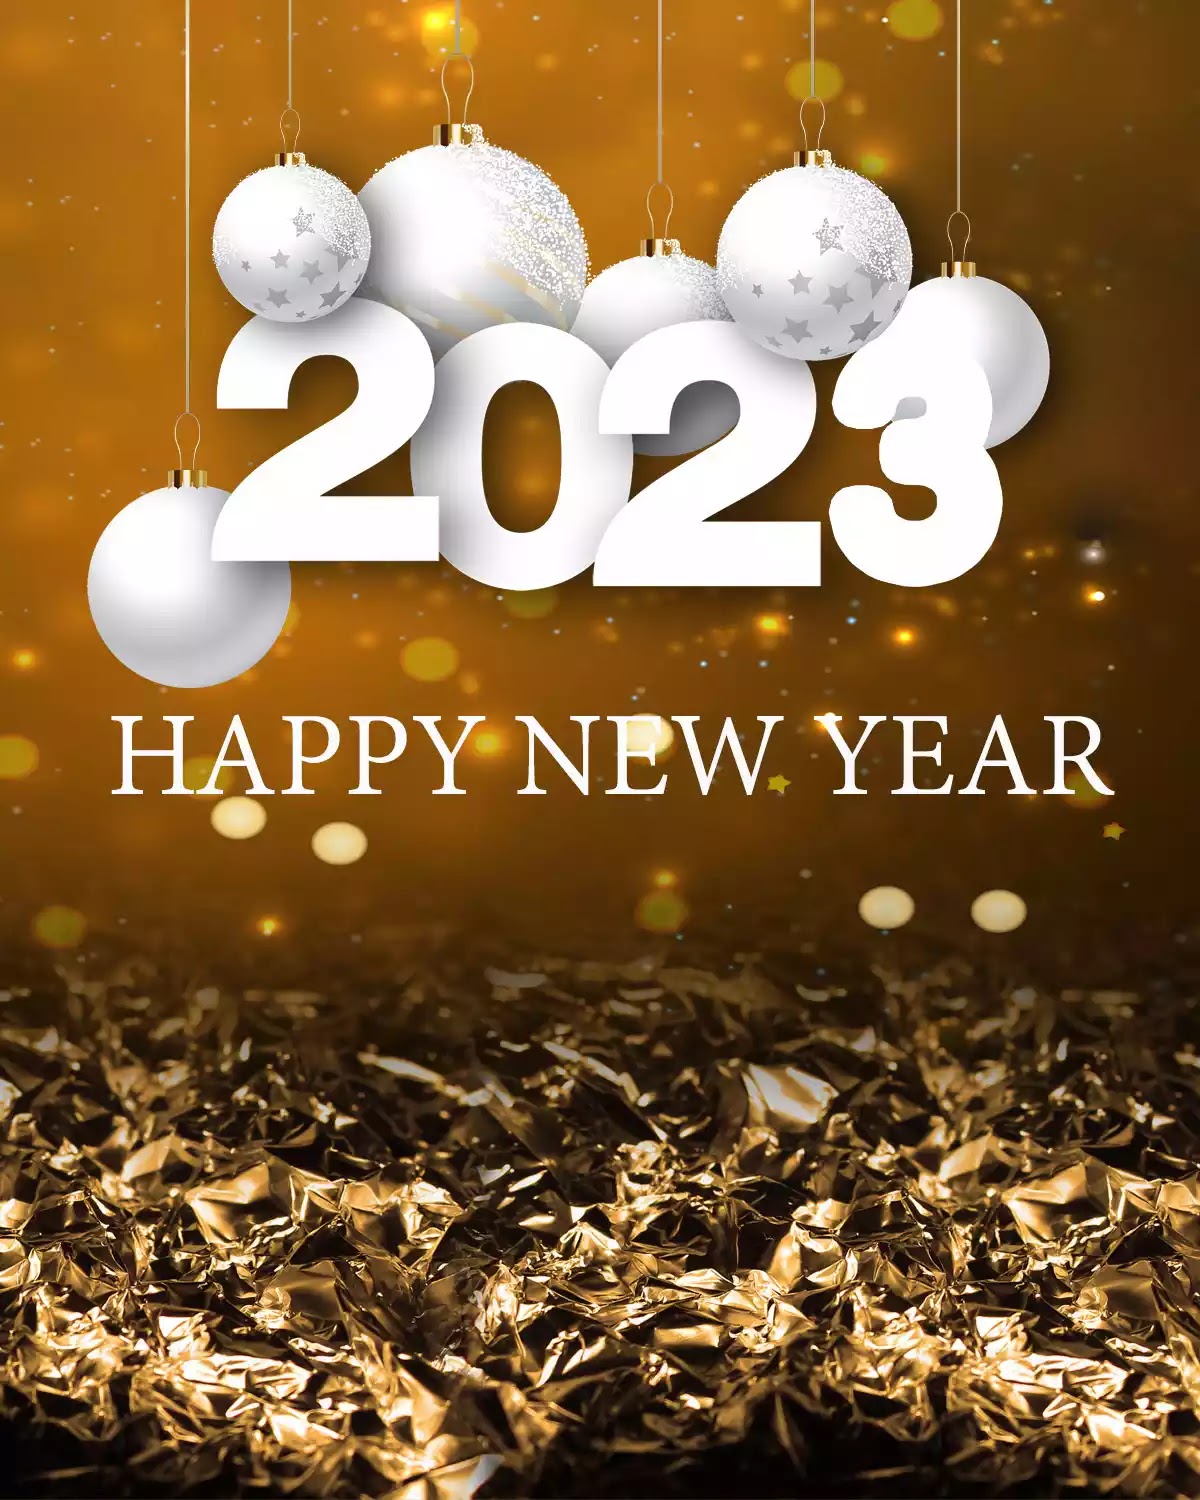 Happy New Year 2023 Background For PicsArt, Photoshop, Pixellab - Status  Clinic